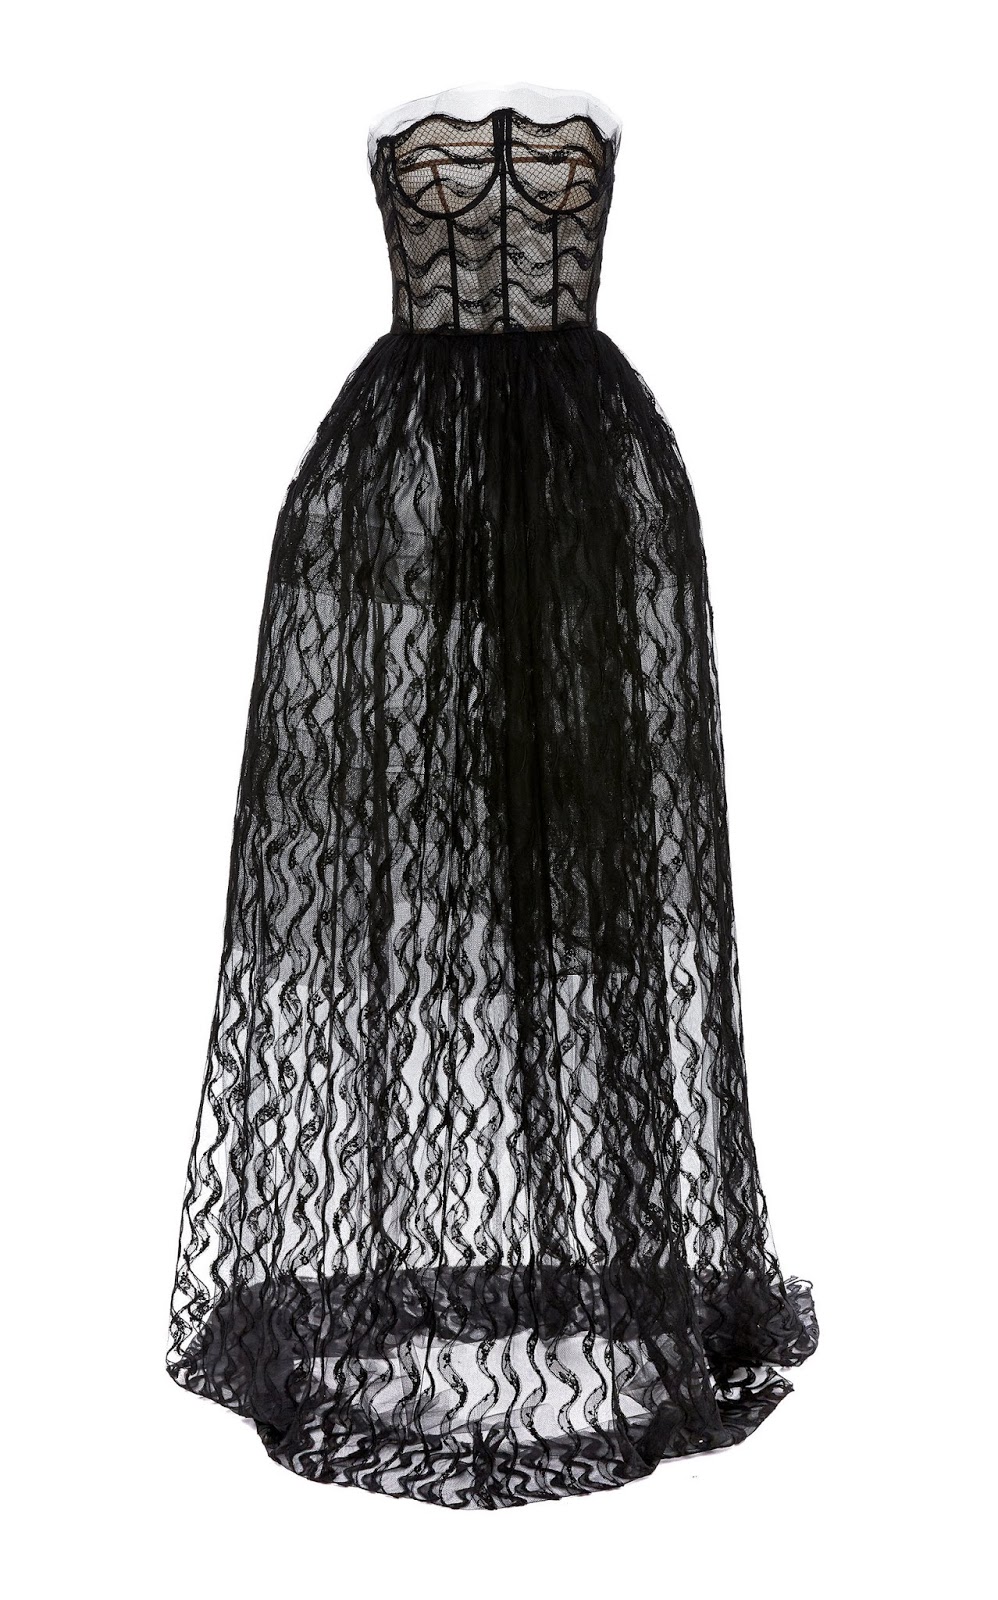 TEN Glamorous and Gorgeous BLACK Dresses for you.